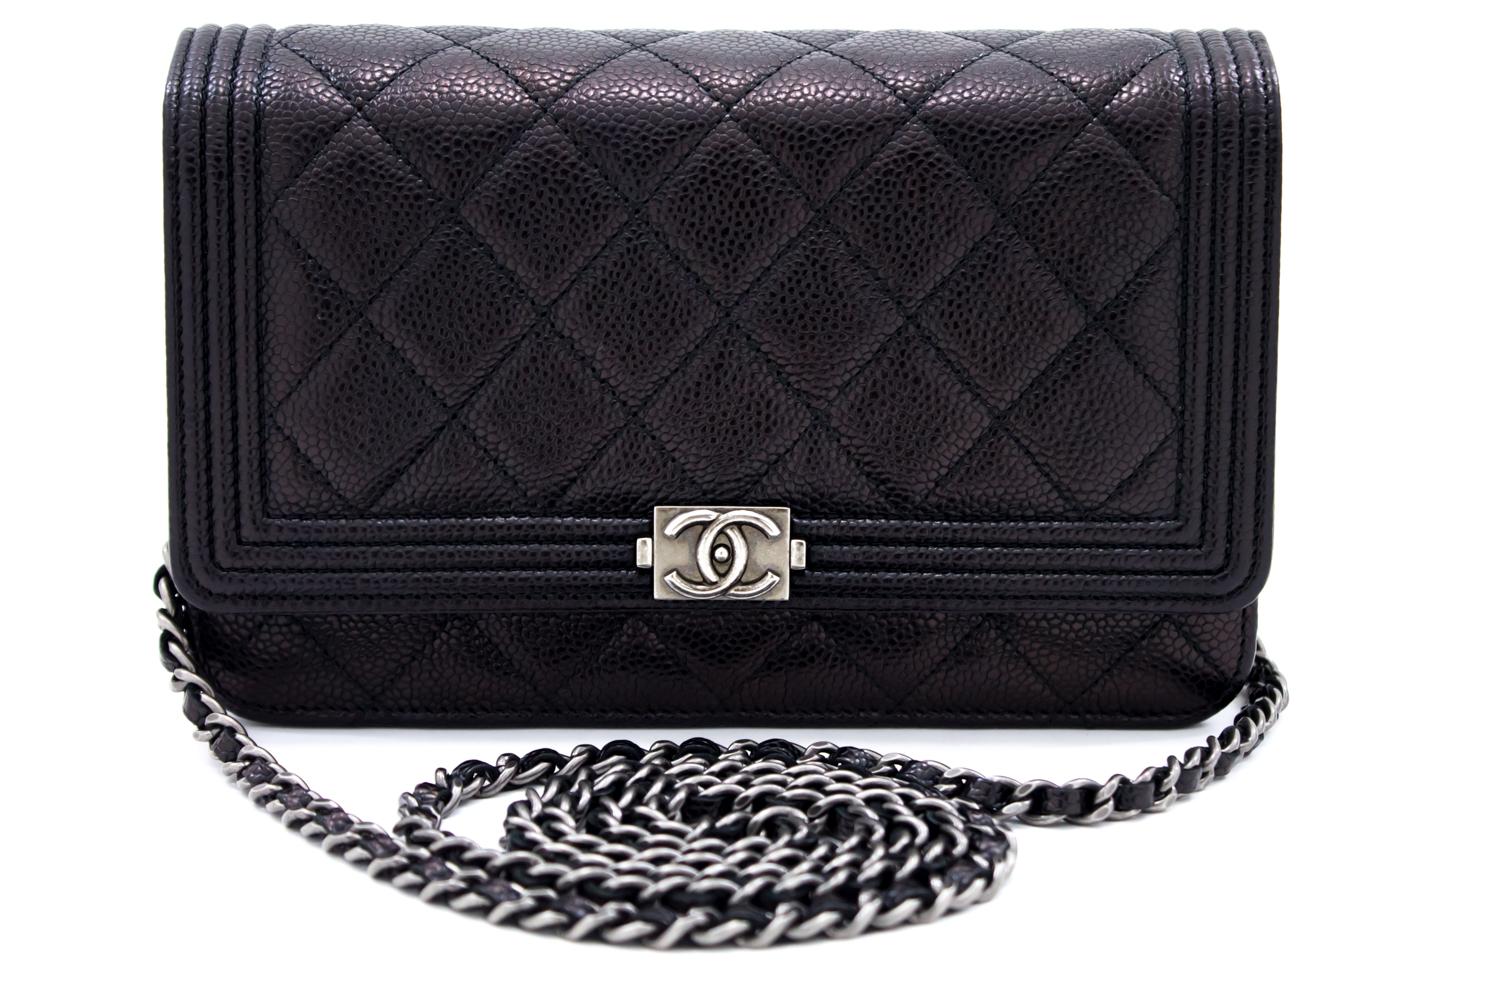 An authentic CHANEL Boy Caviar Black Wallet On Chain WOC Shoulder Bag Quilted. The color is Black. The outside material is Leather. The pattern is Solid. This item is Contemporary. The year of manufacture would be 2014.
Conditions & Ratings
Outside